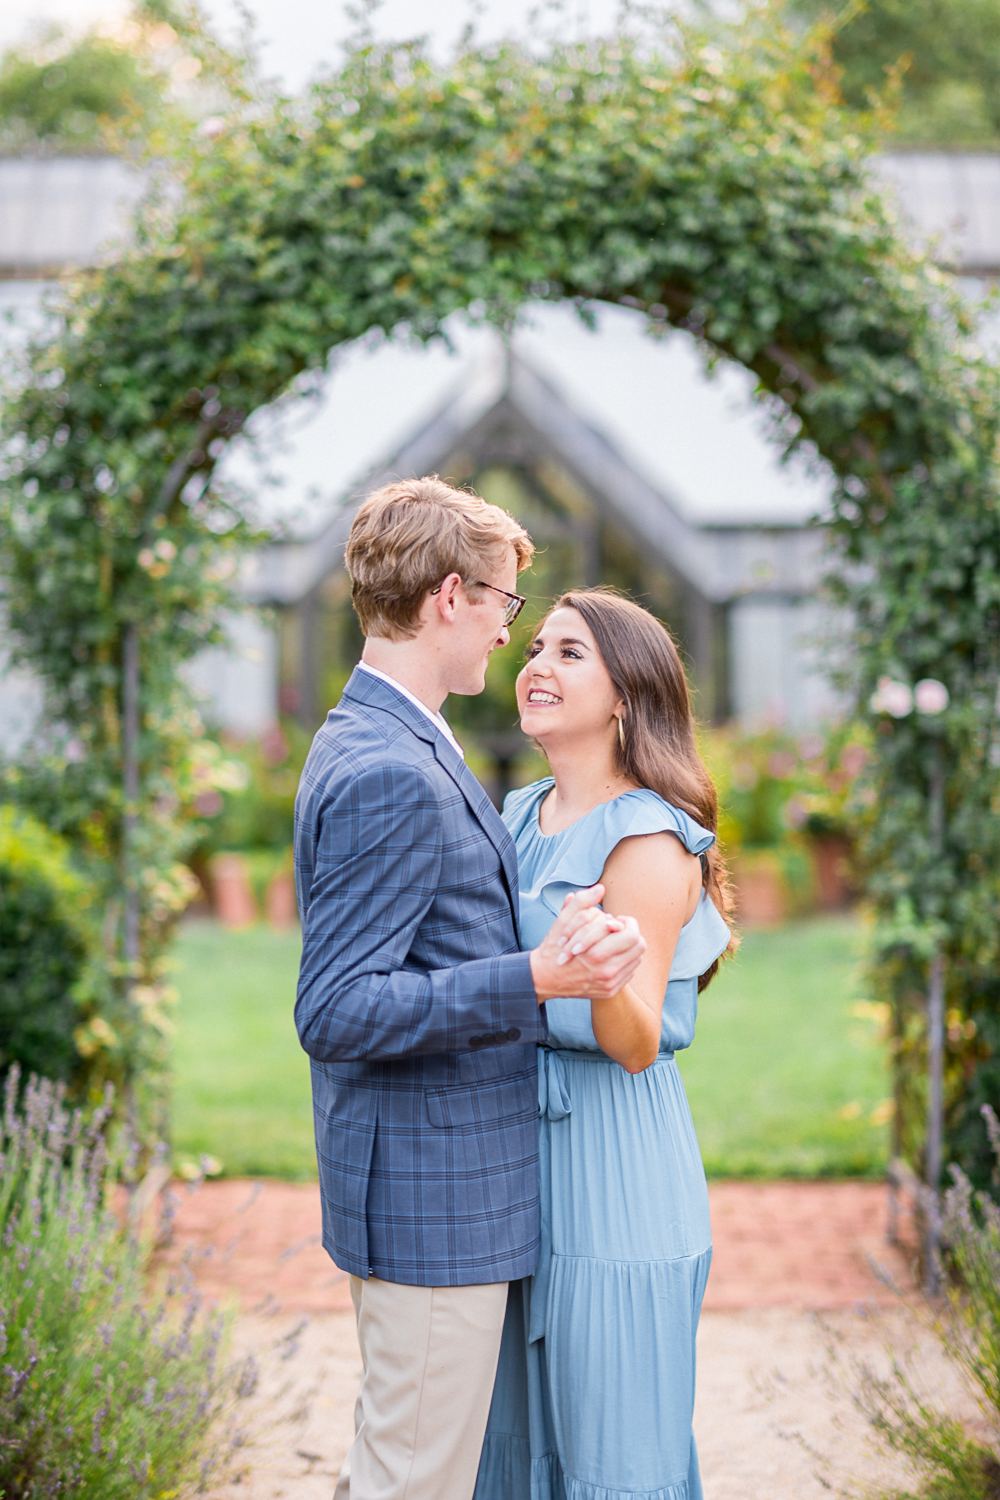 Summery Sunset Engagement Session at the Gardens at Waterperry Farms - Hunter and Sarah Photography